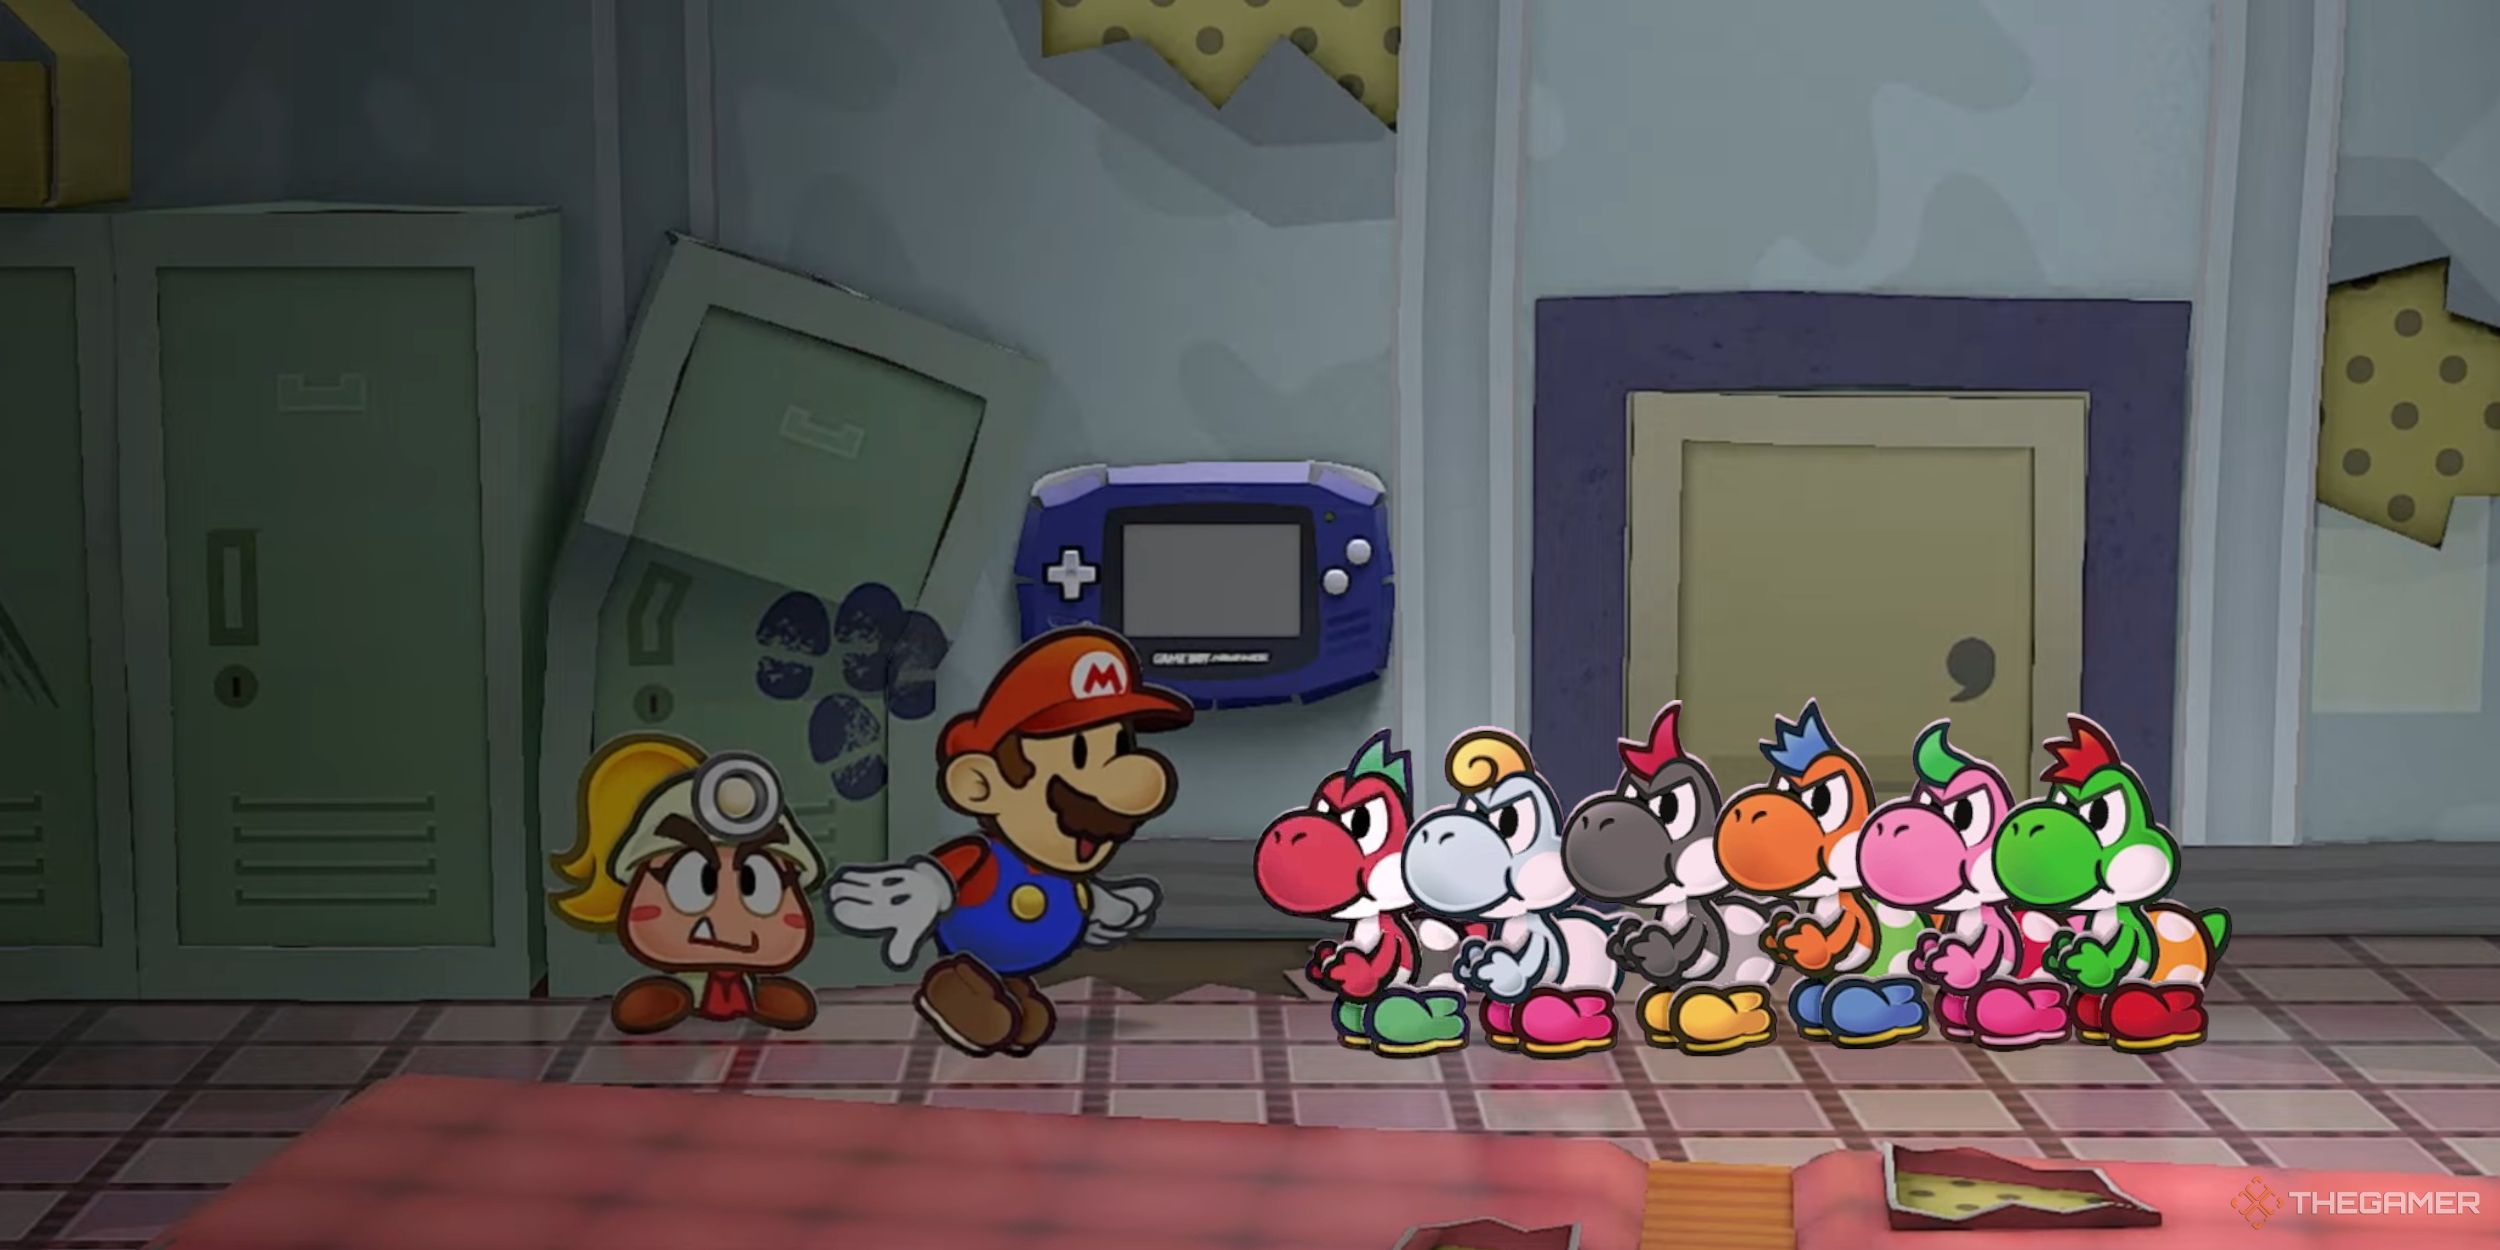 Mario getting surprised that the Egg hatched into a Yoshi in Paper Mario: The Thousand-Year Door!